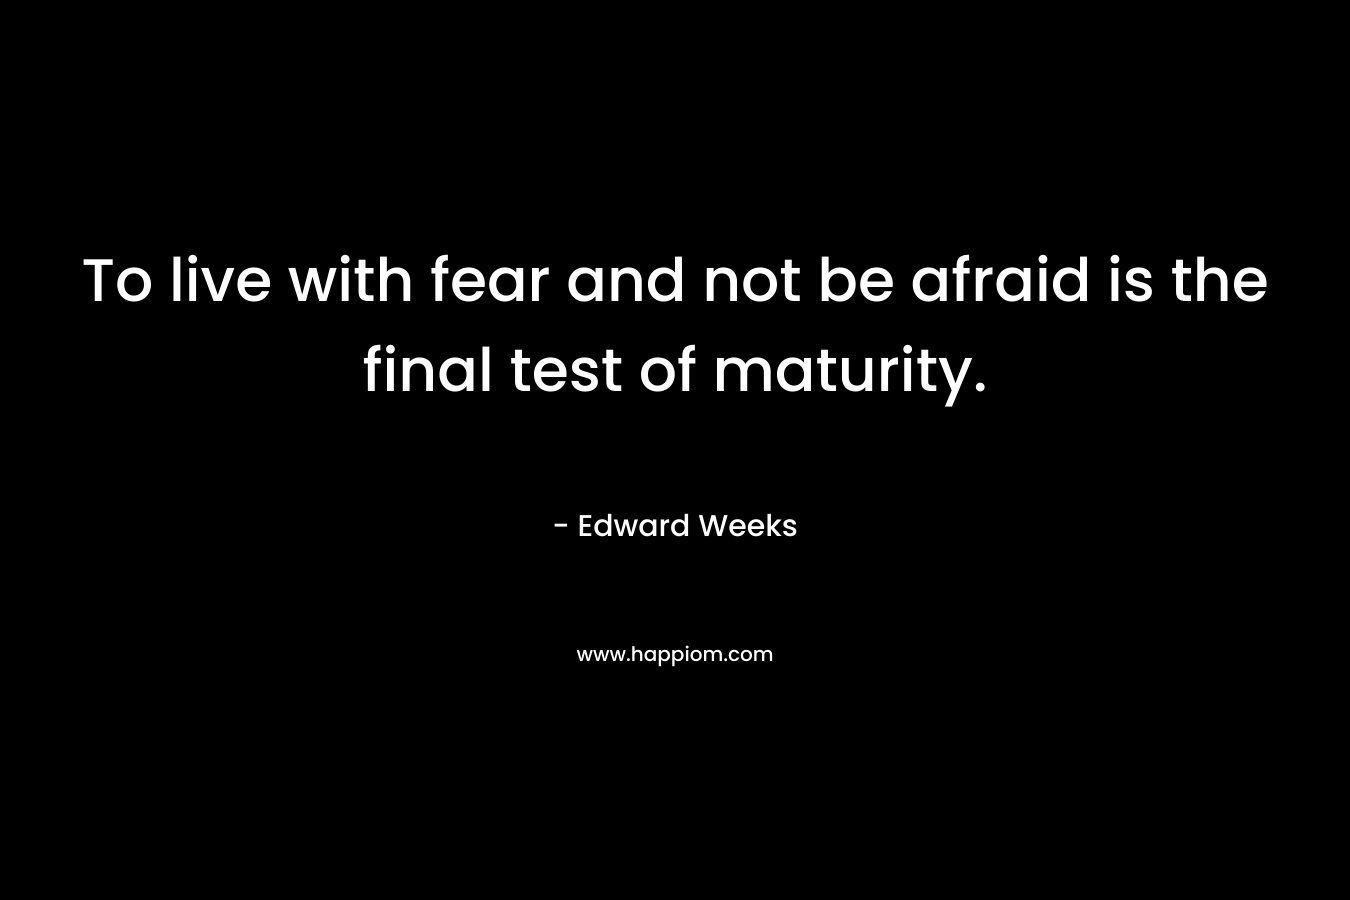 To live with fear and not be afraid is the final test of maturity. – Edward Weeks